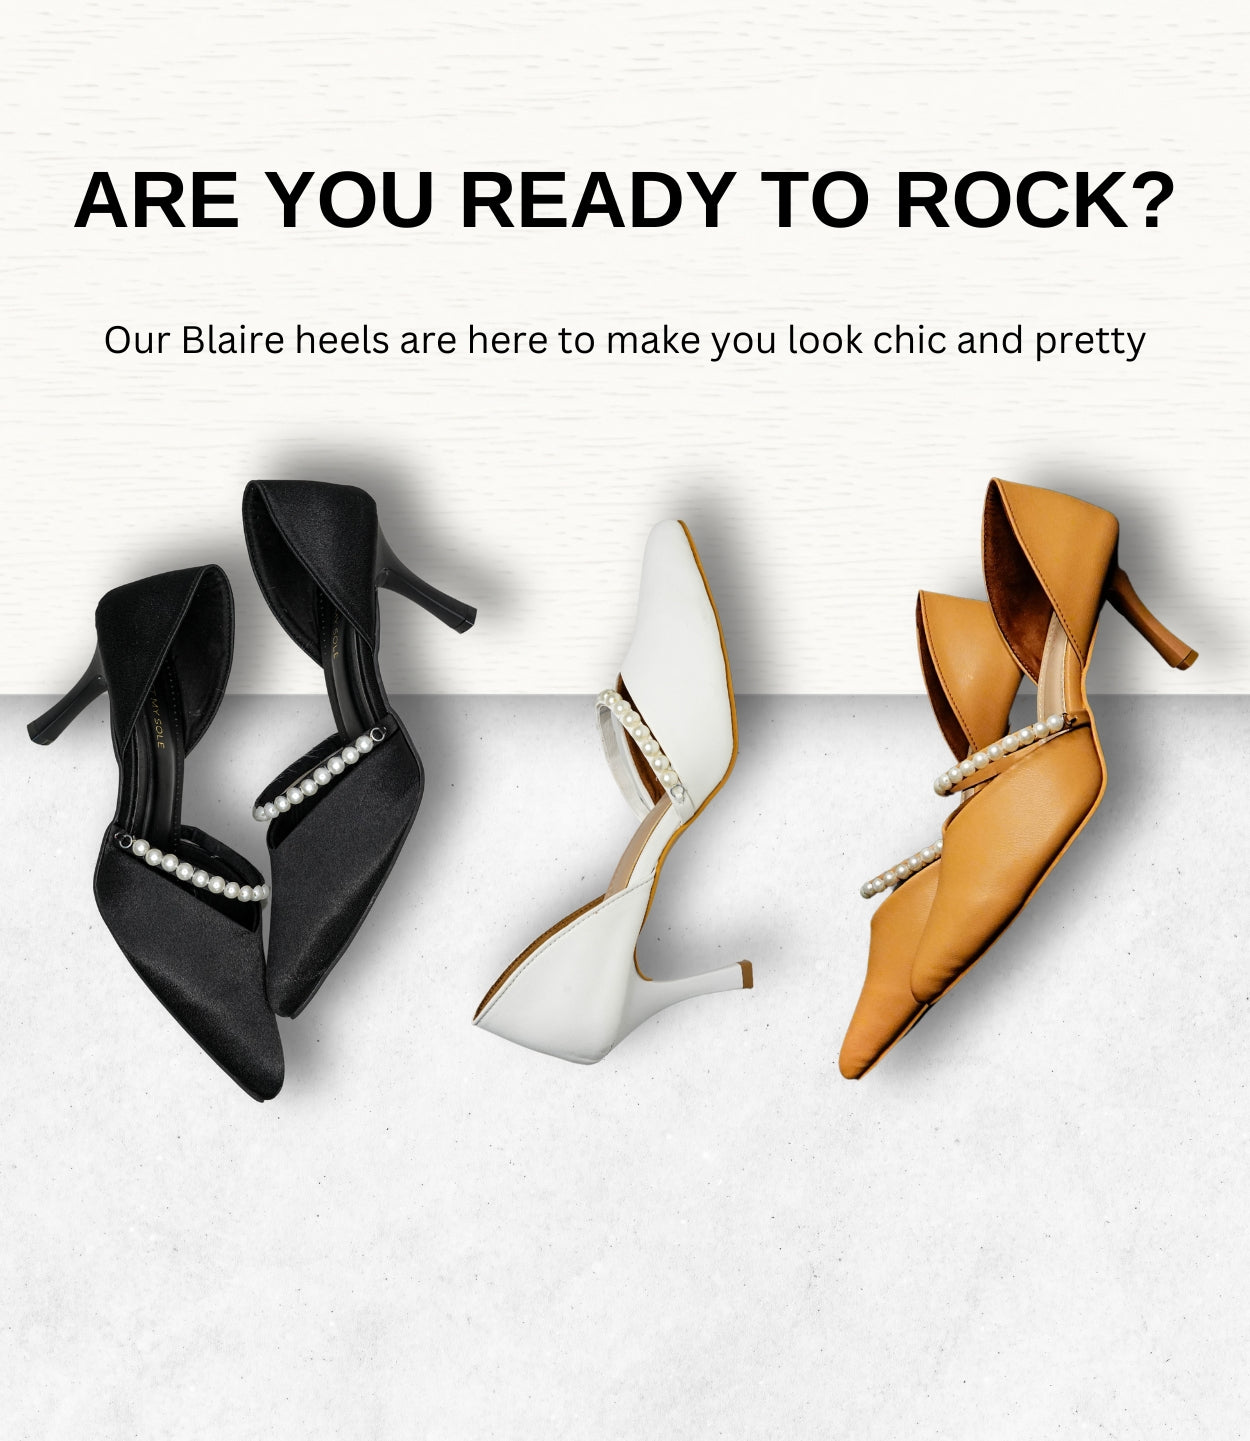 Are You Ready to Rock? - Blaire Pearl Pumps/Heels - Mobile